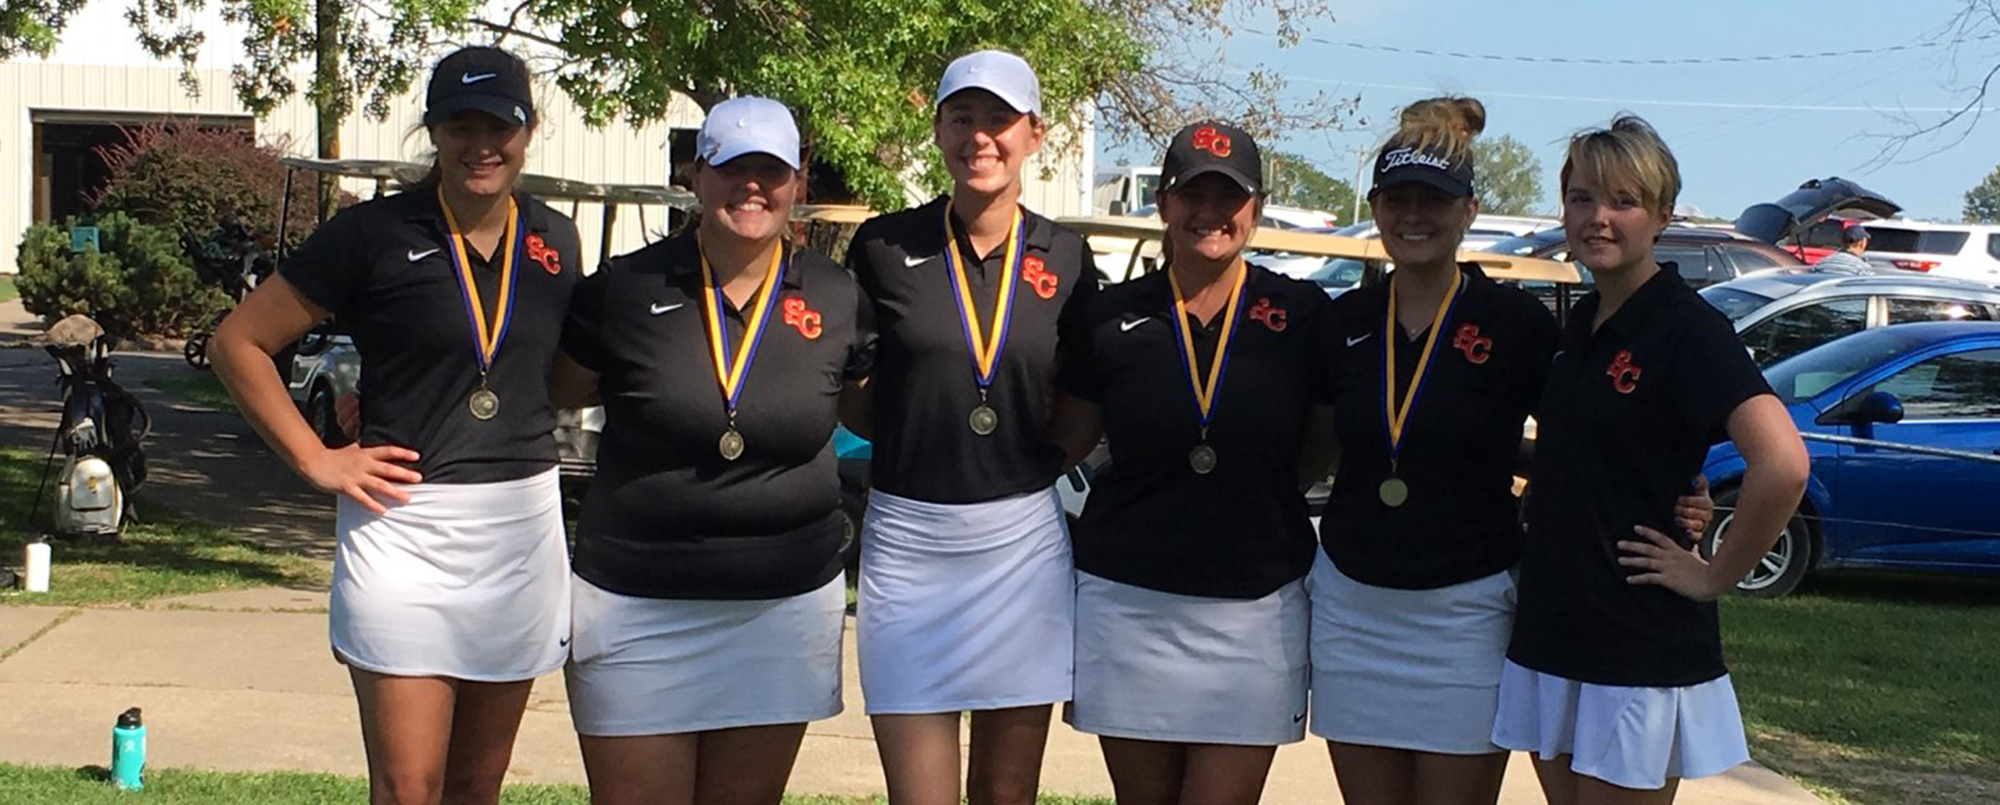 The Storm garnered first place at the seven team Graceland Invitational.